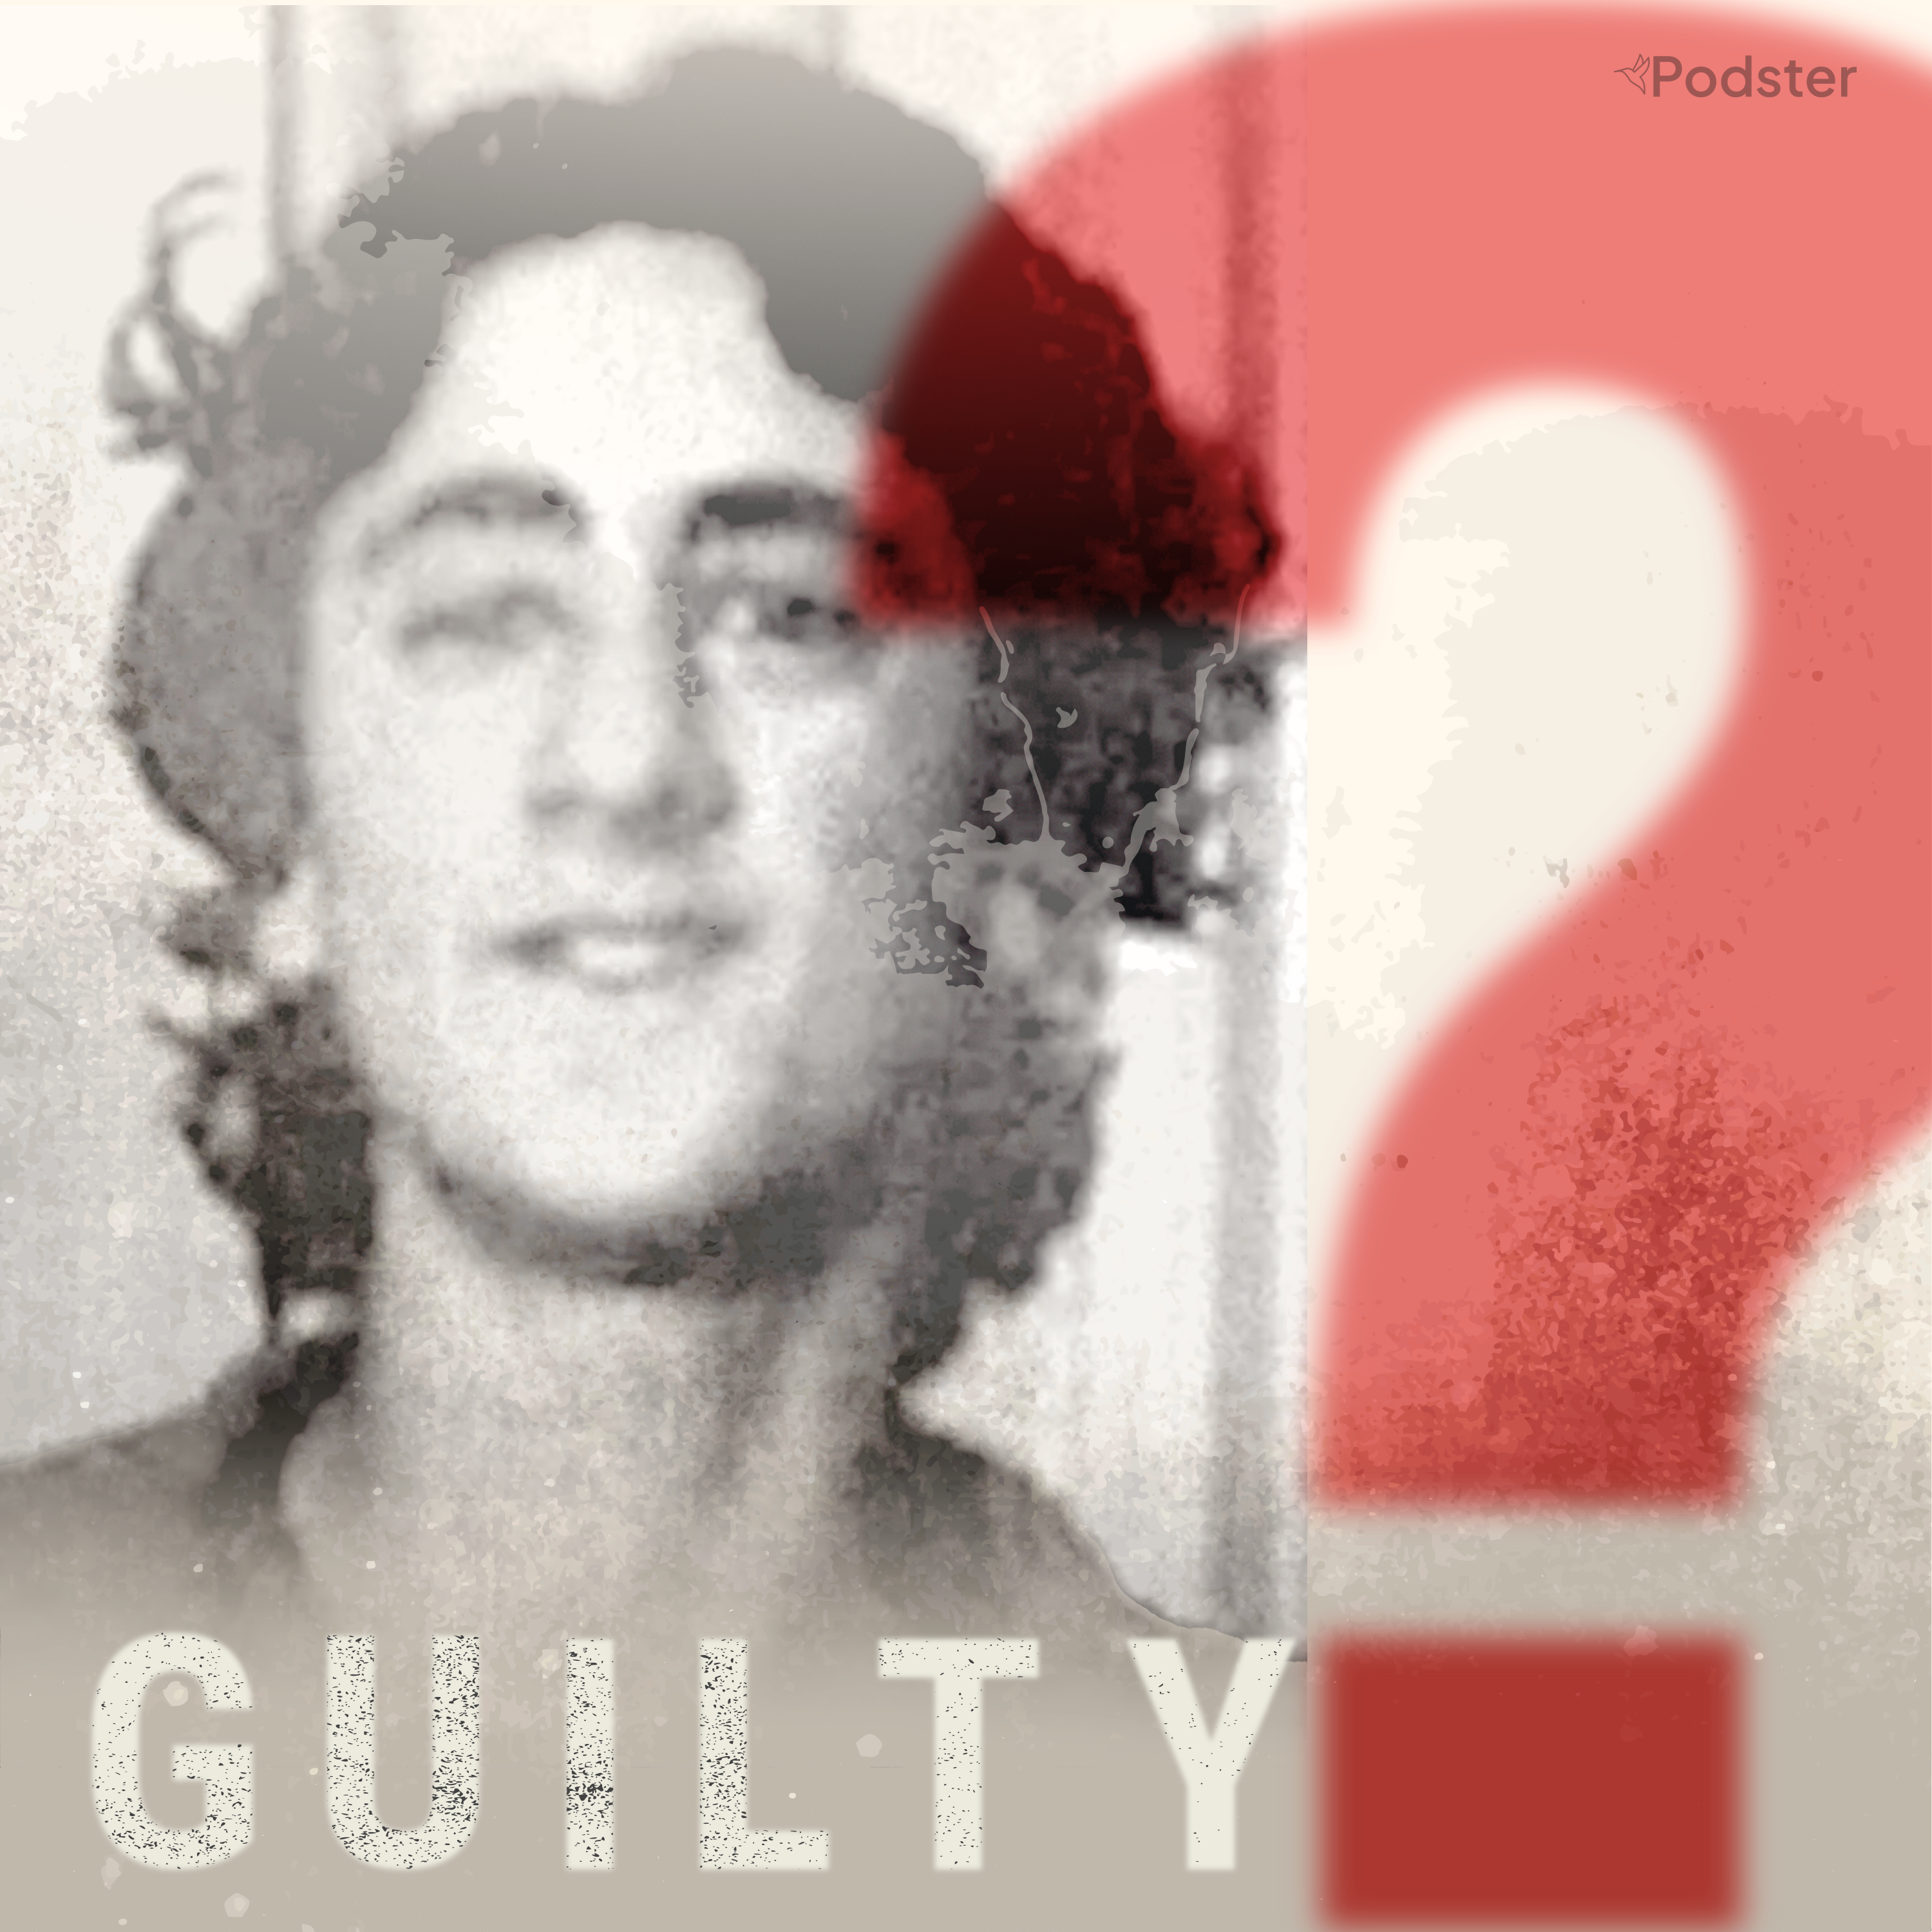 GUILTY? <br> A 29-year-old ambiguous murder case is investigated anew, which leads to a surprising discovery about the murderer.